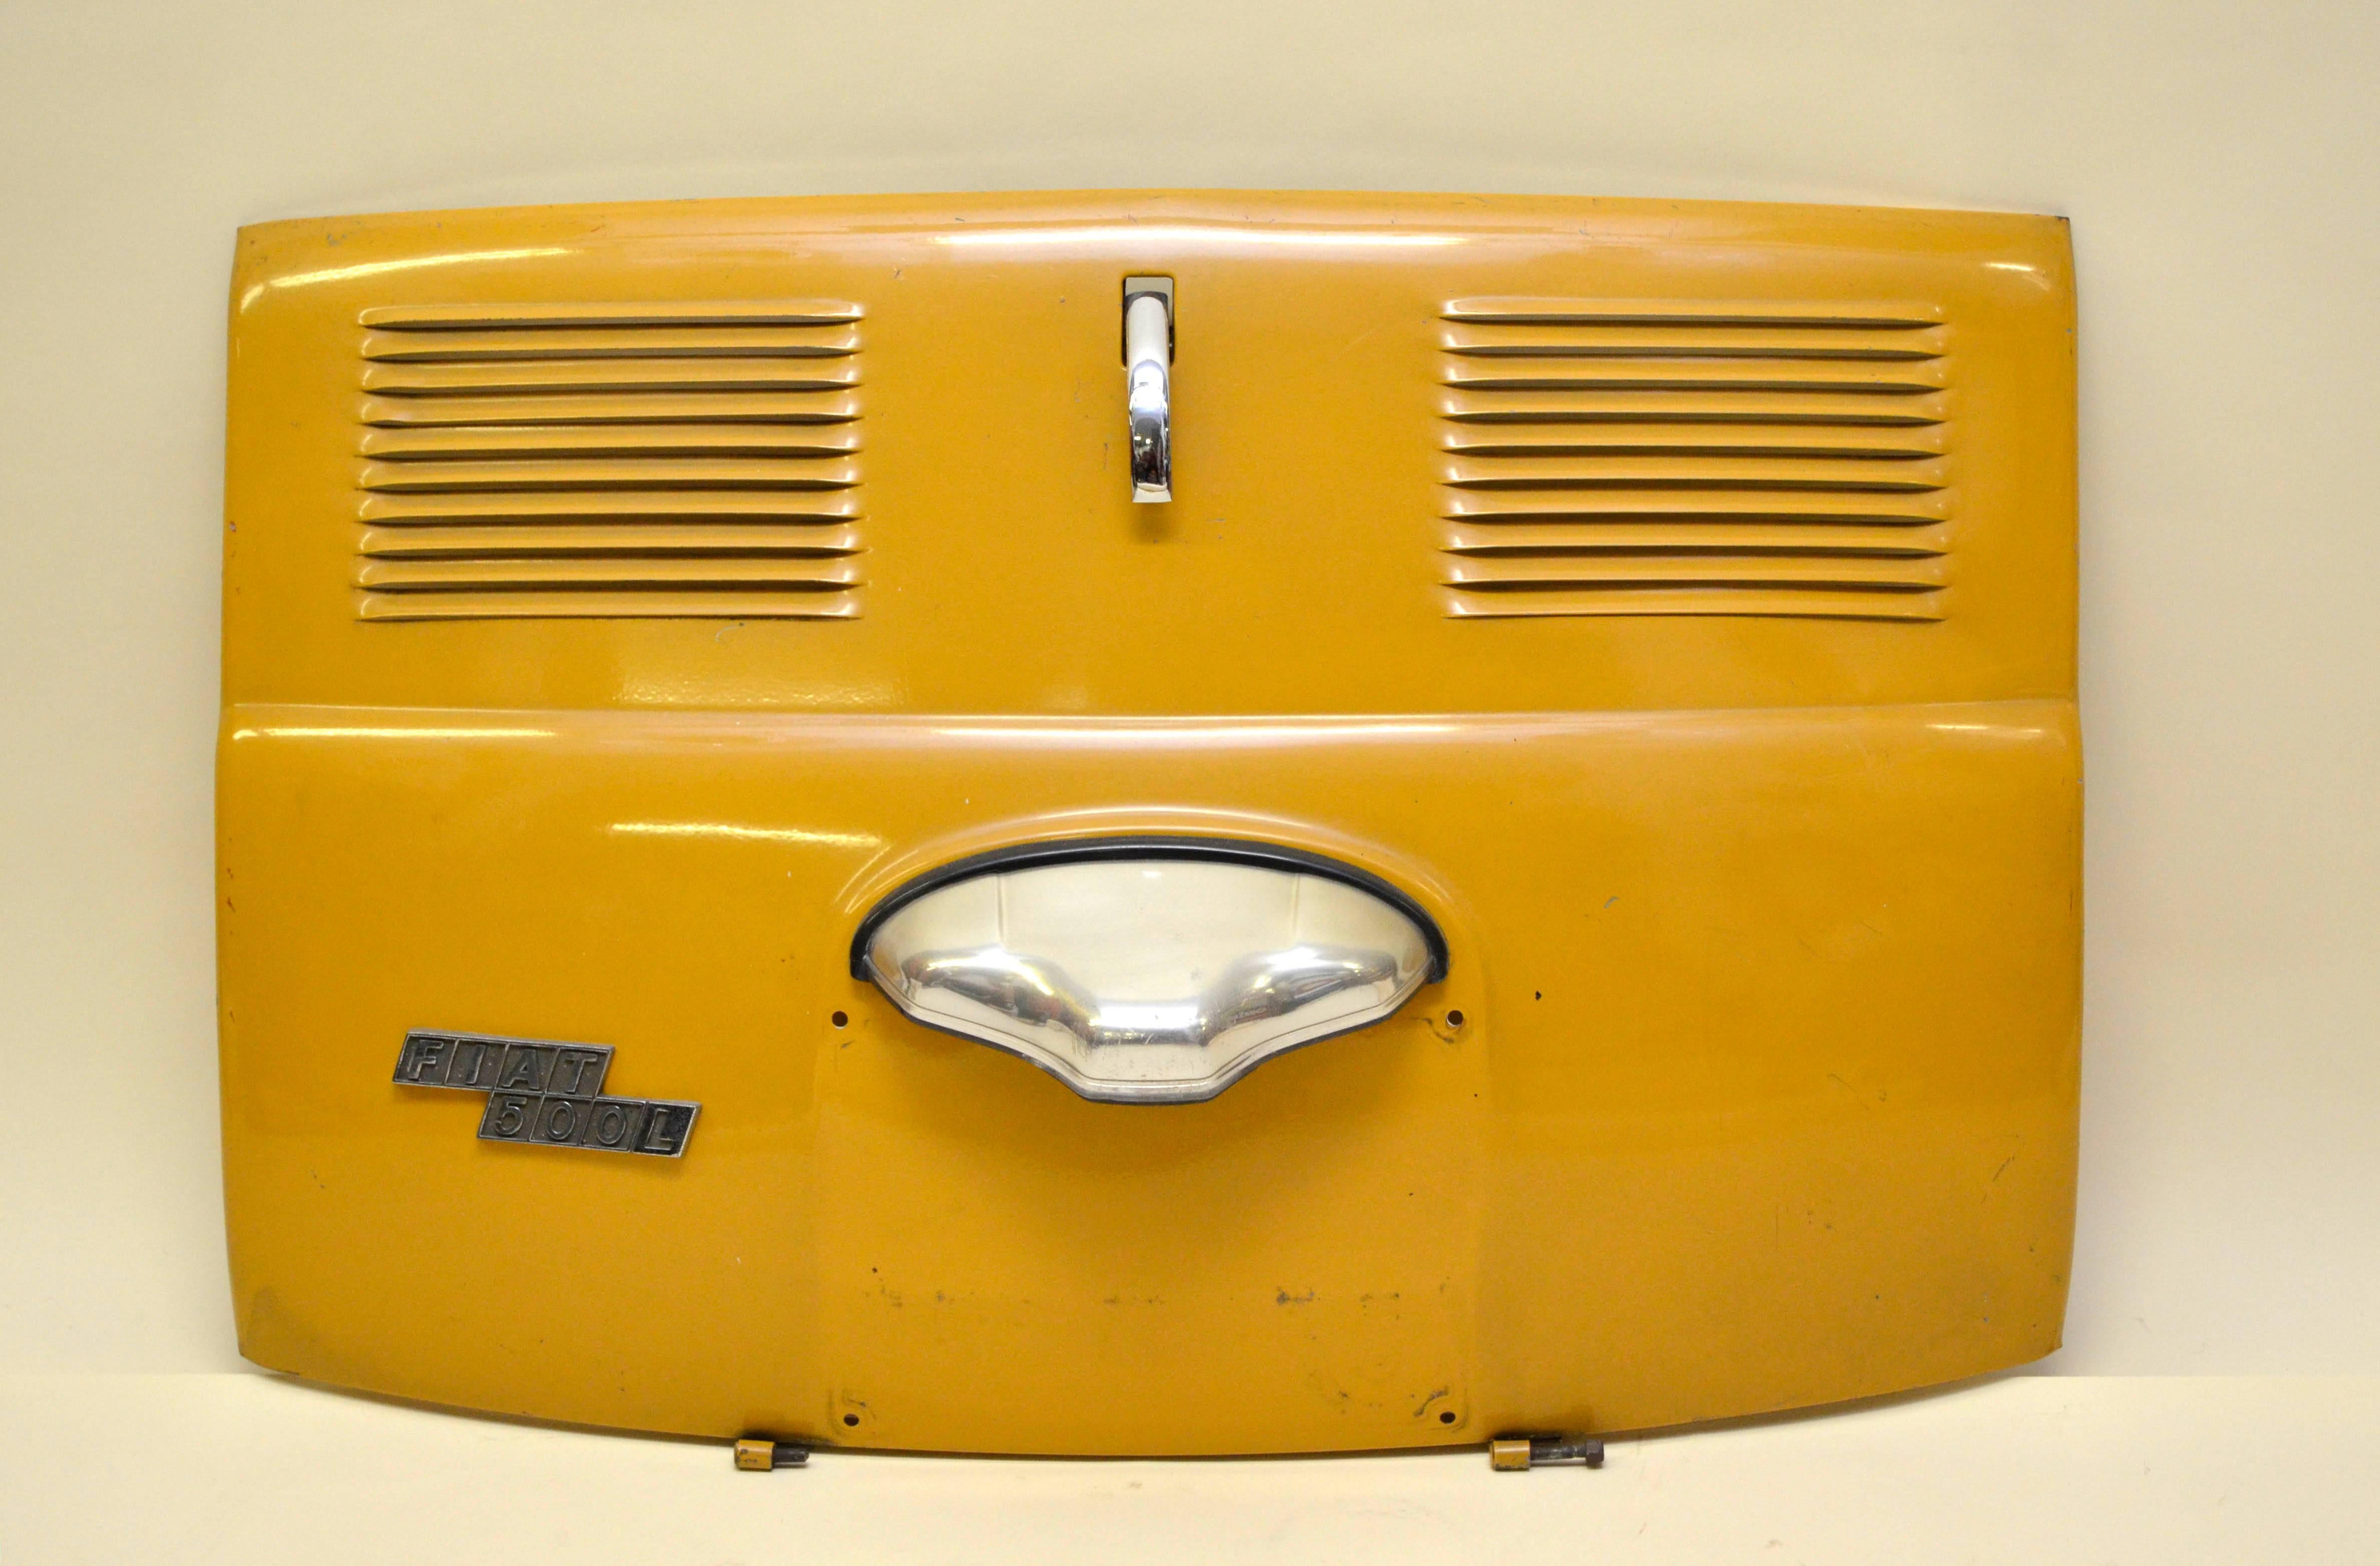 1970s vintage Fiat 500 L yellow trunk lid with steel parts. 

Collector's note.

The Fiat 500 was a rear-engined two-door, four seat, small city car manufactured and marketed by Fiat Automobiles from 1957-1975 over a single generation in